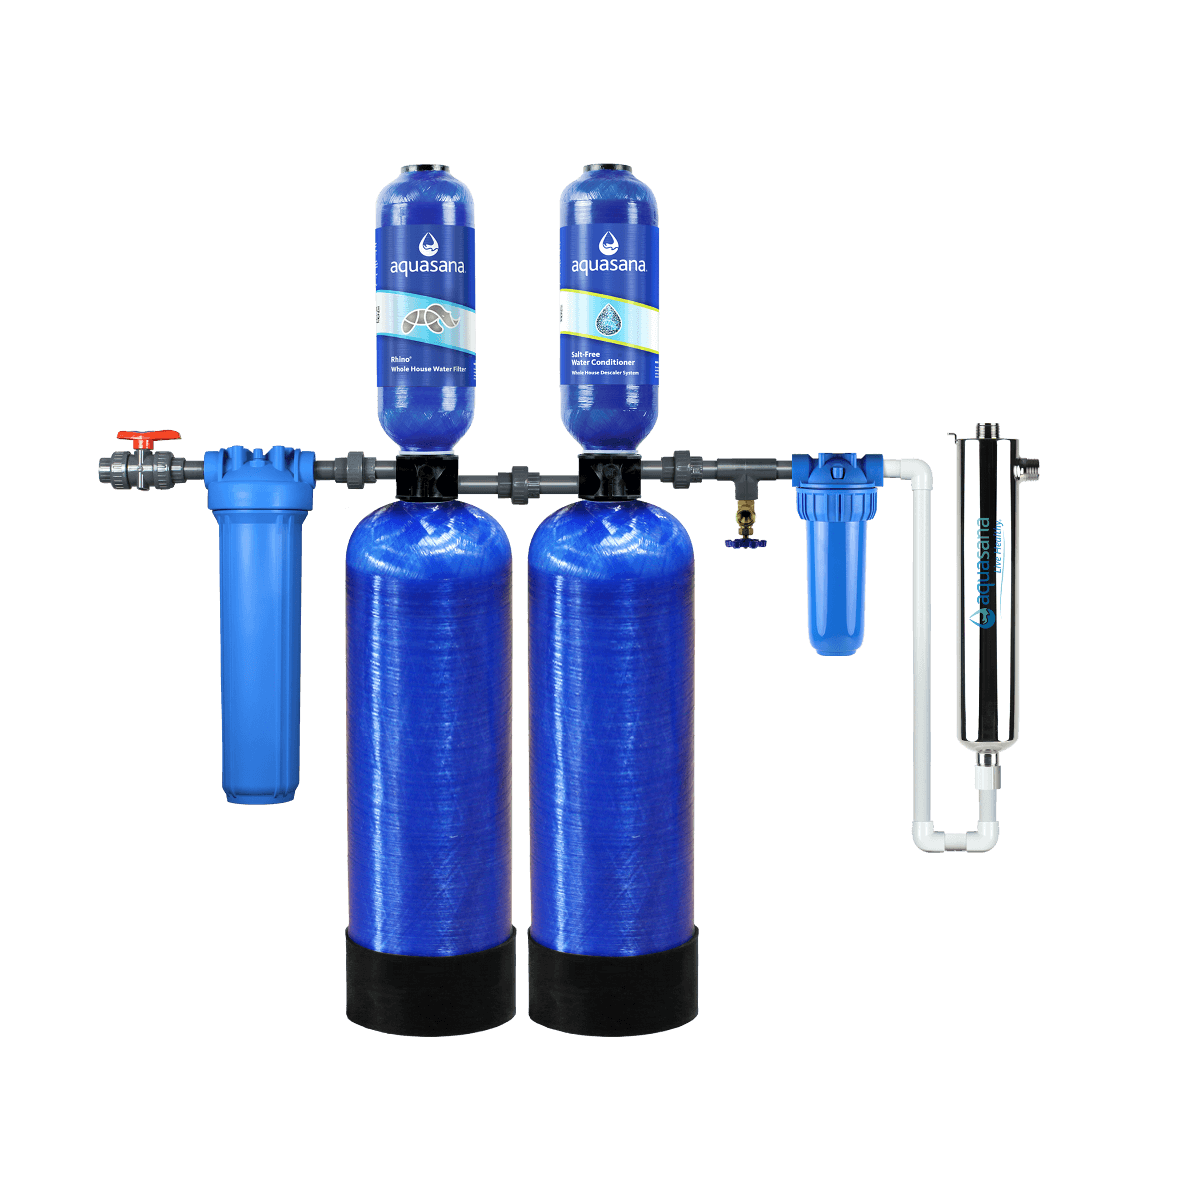 Rhino® Max Flow Whole House Water UV Filter System Home Water Filtration Removes 99% of Bacteria & Viruses Aquasana